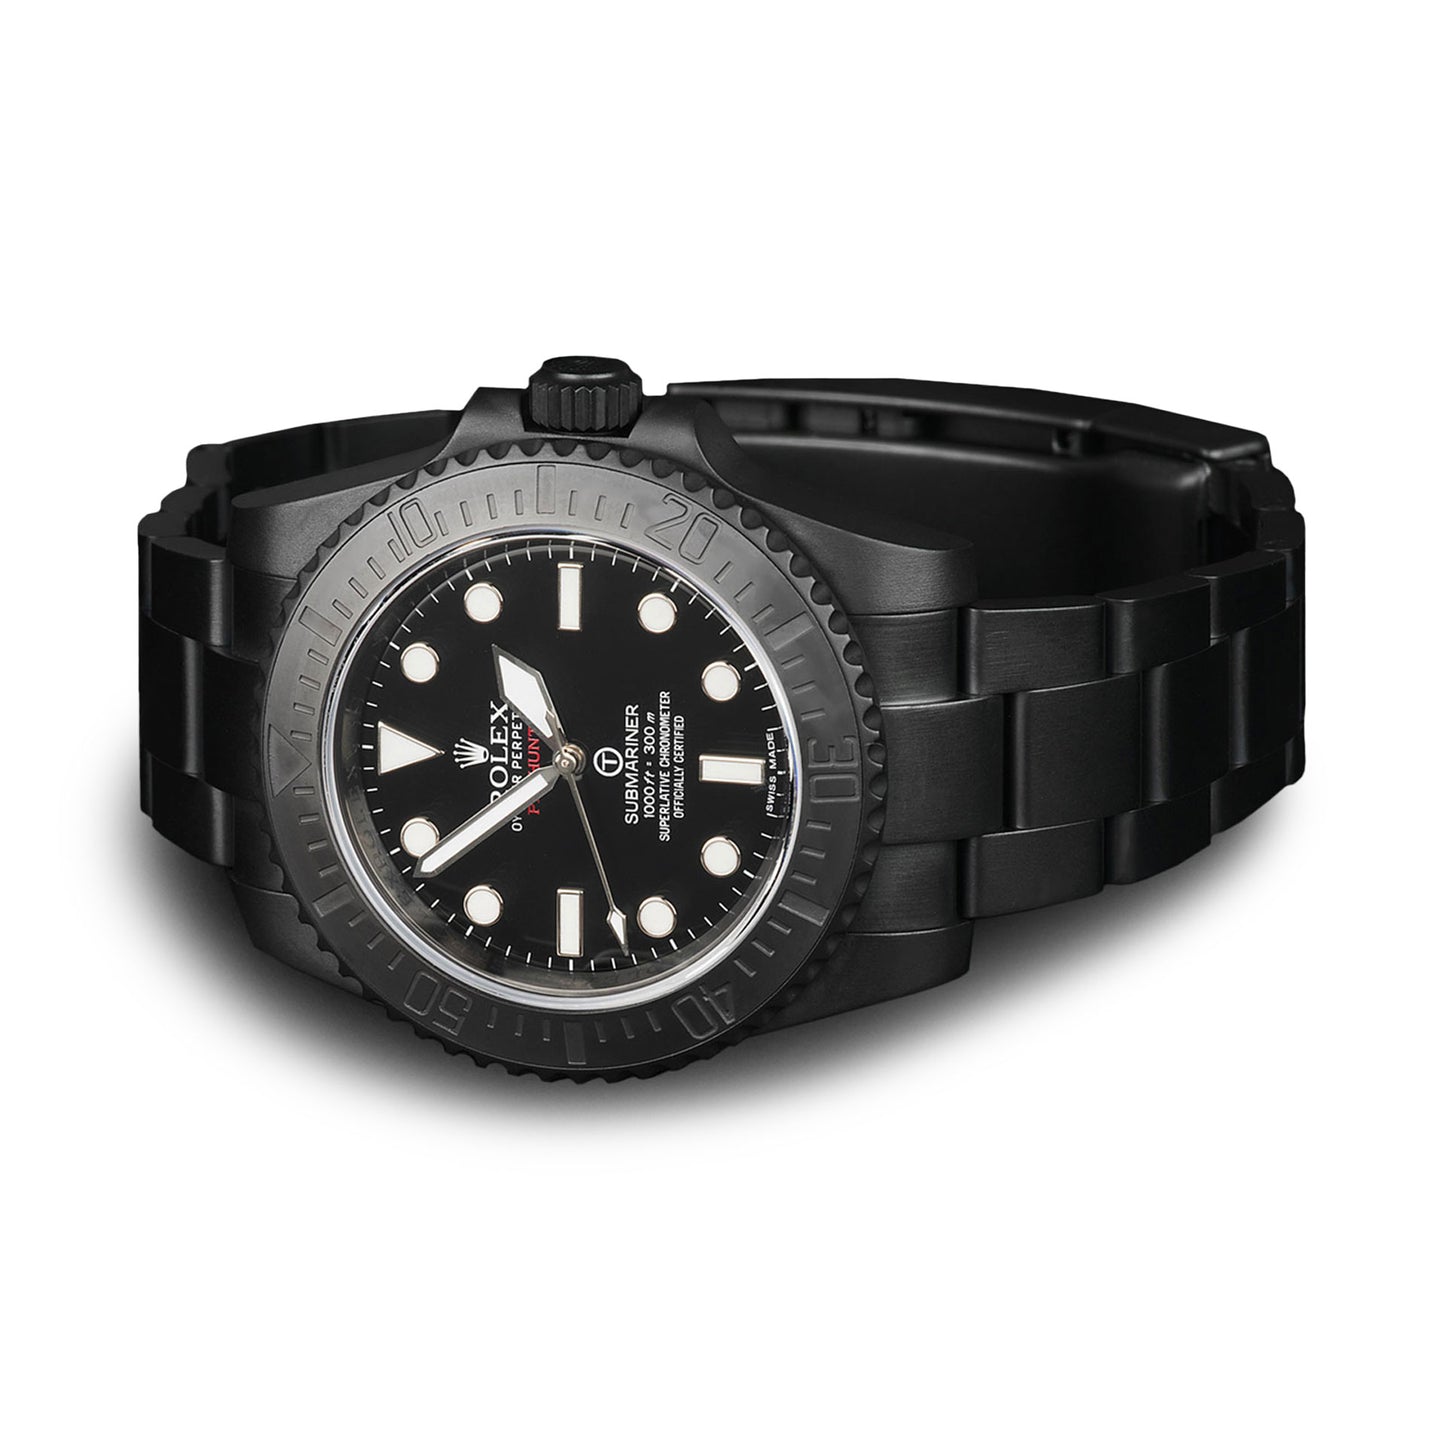 Pro Hunter Submariner Military Stealth Watch